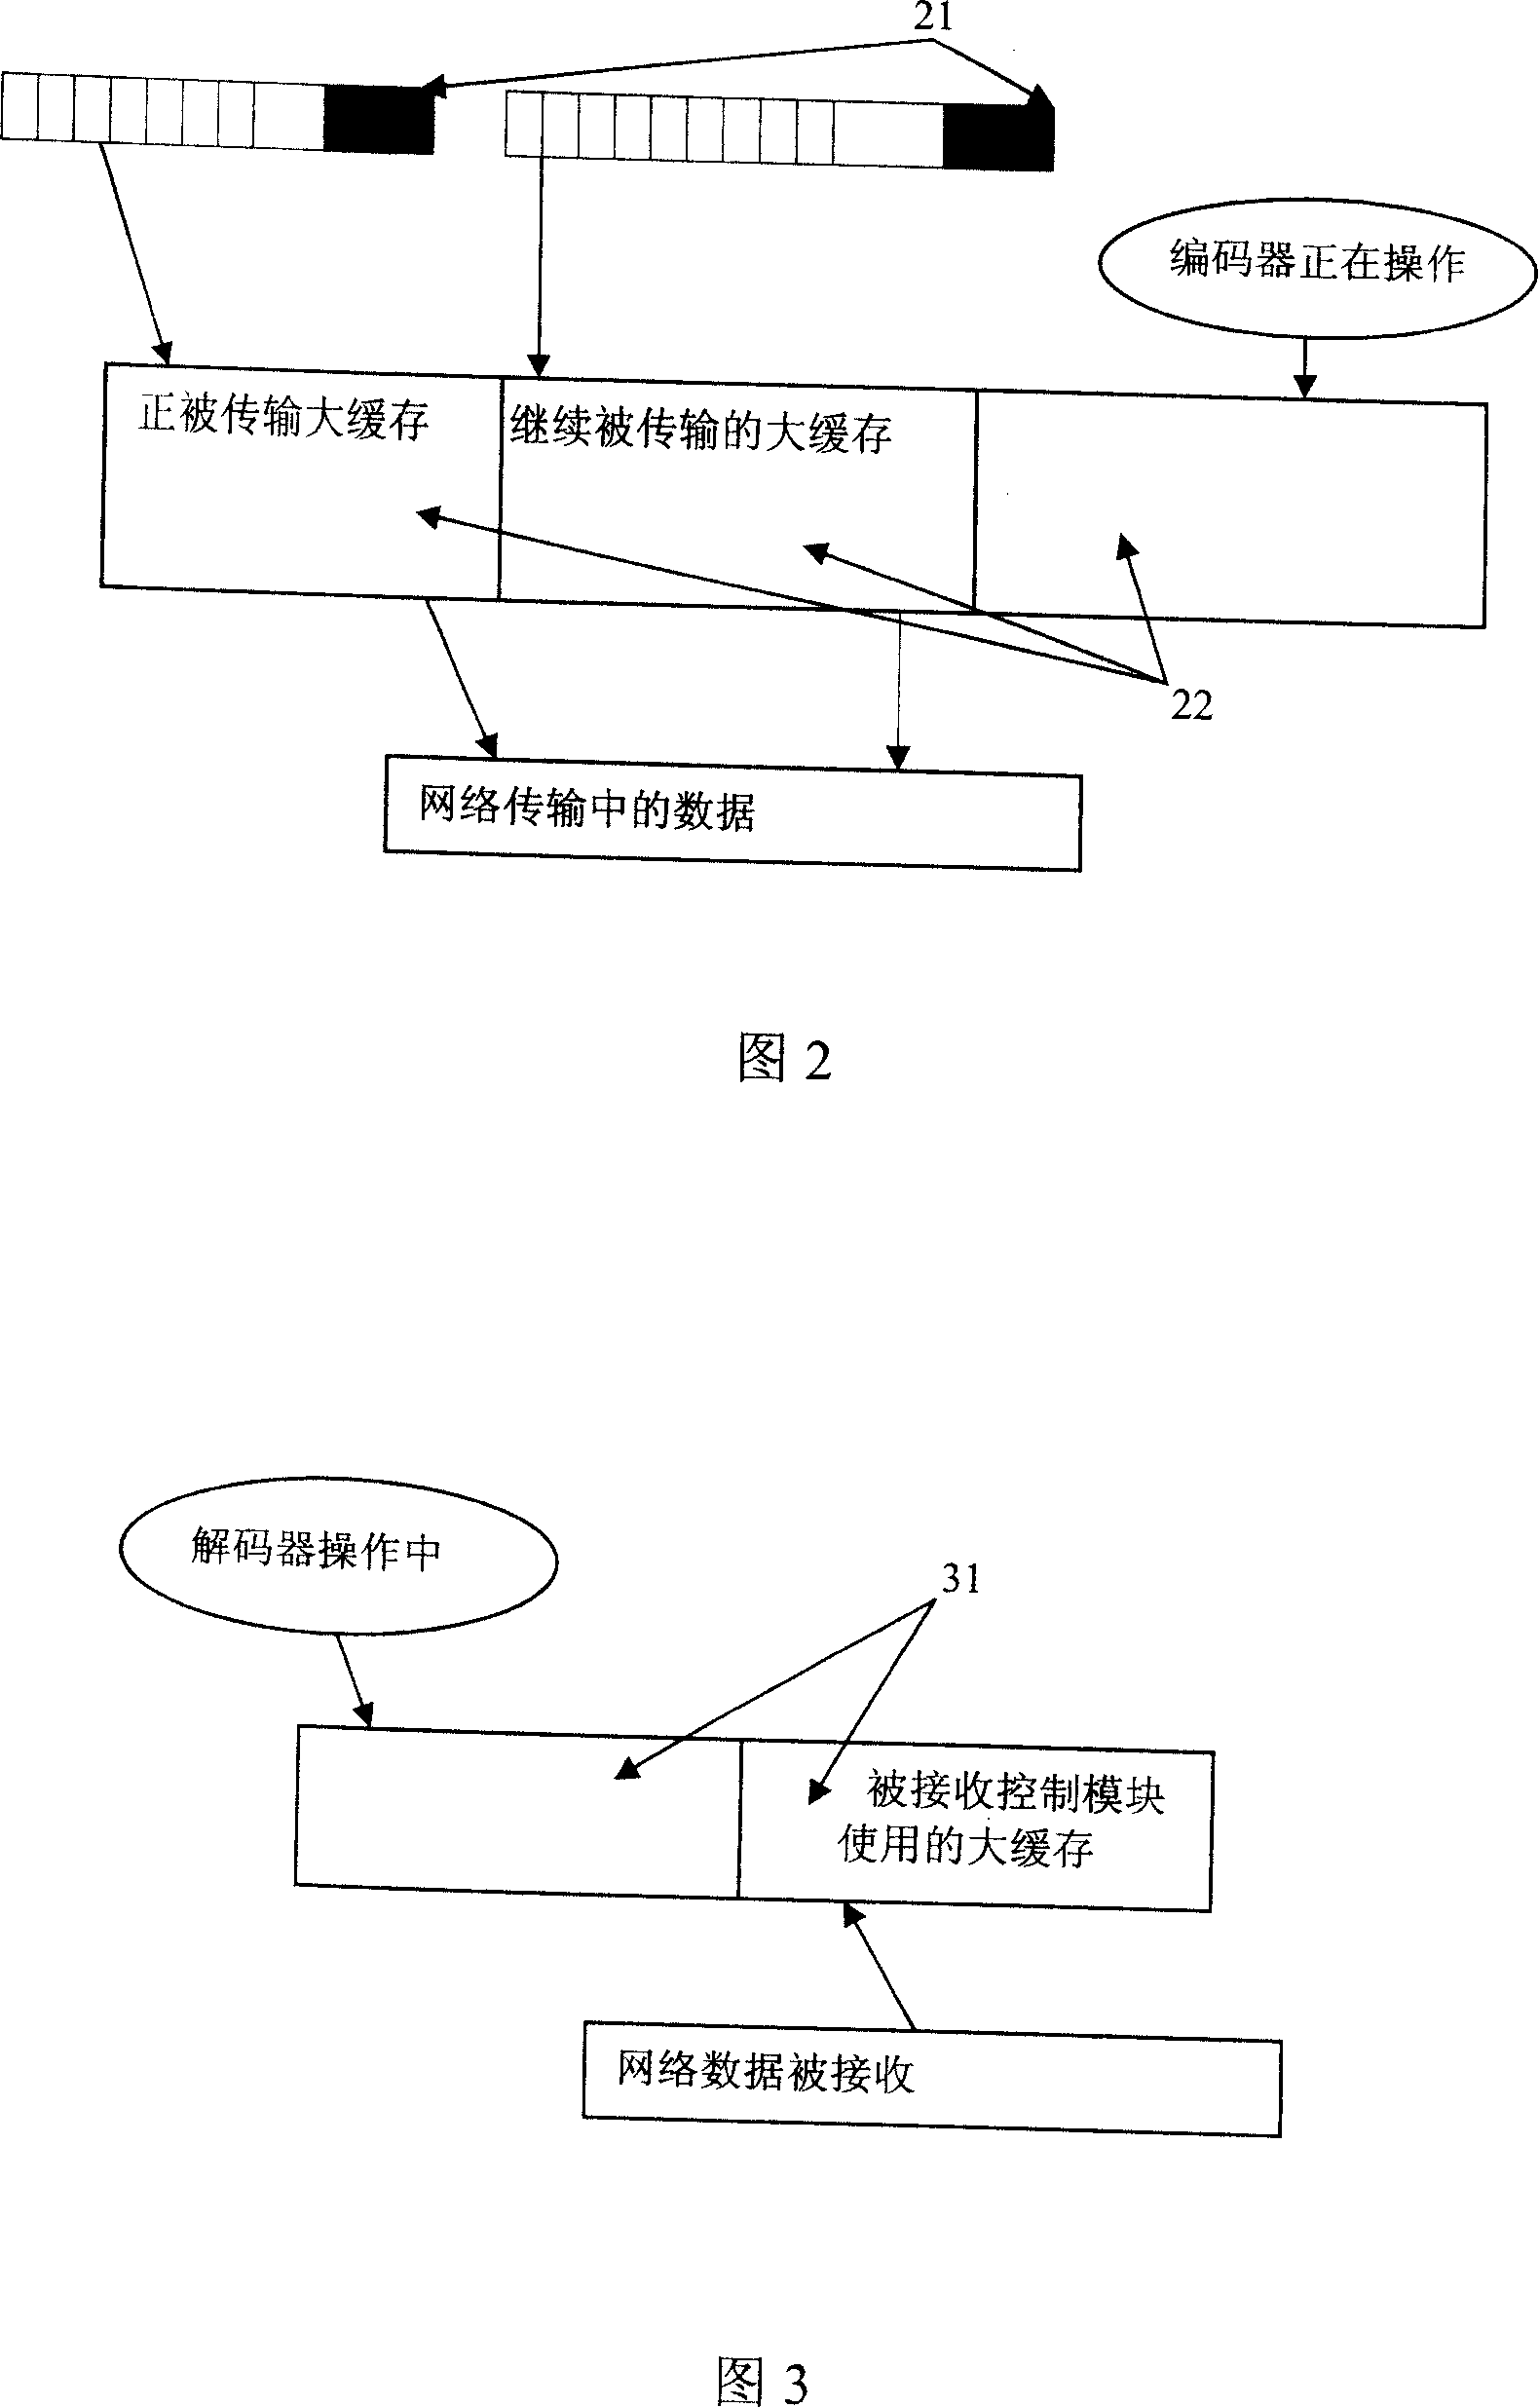 Indirect real-time flux control system and its method